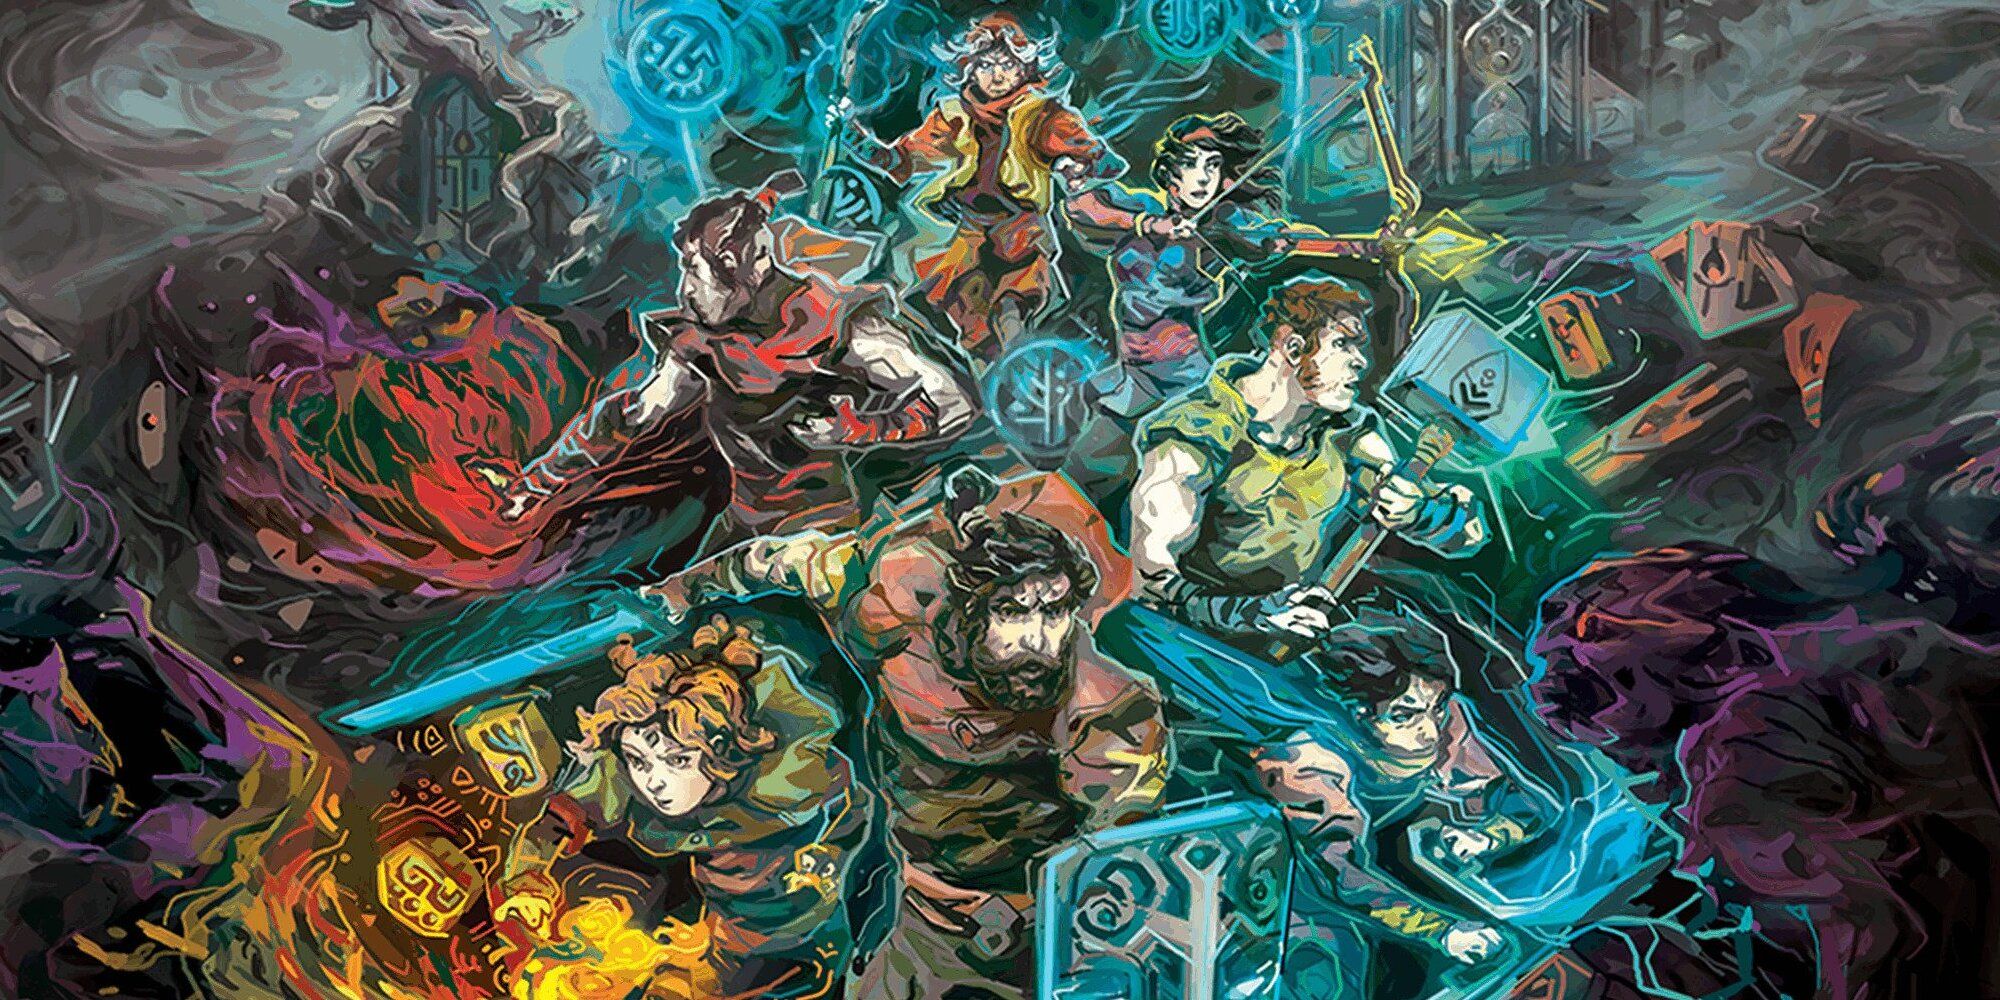 The main cast of Children of Morta in the extended version of the cover art